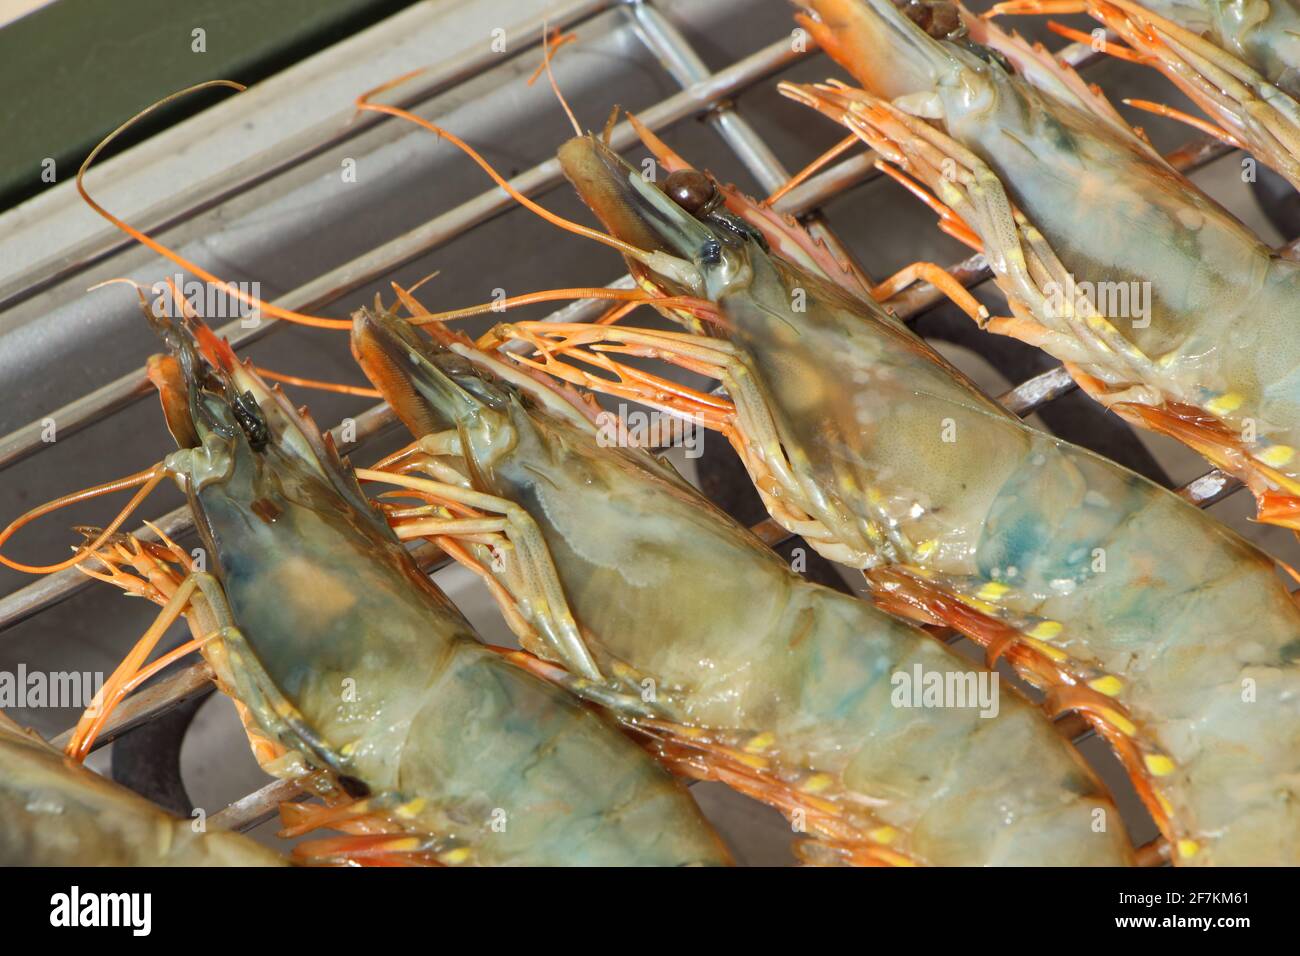 Prawns on the rack of an electric barbecue Stock Photo